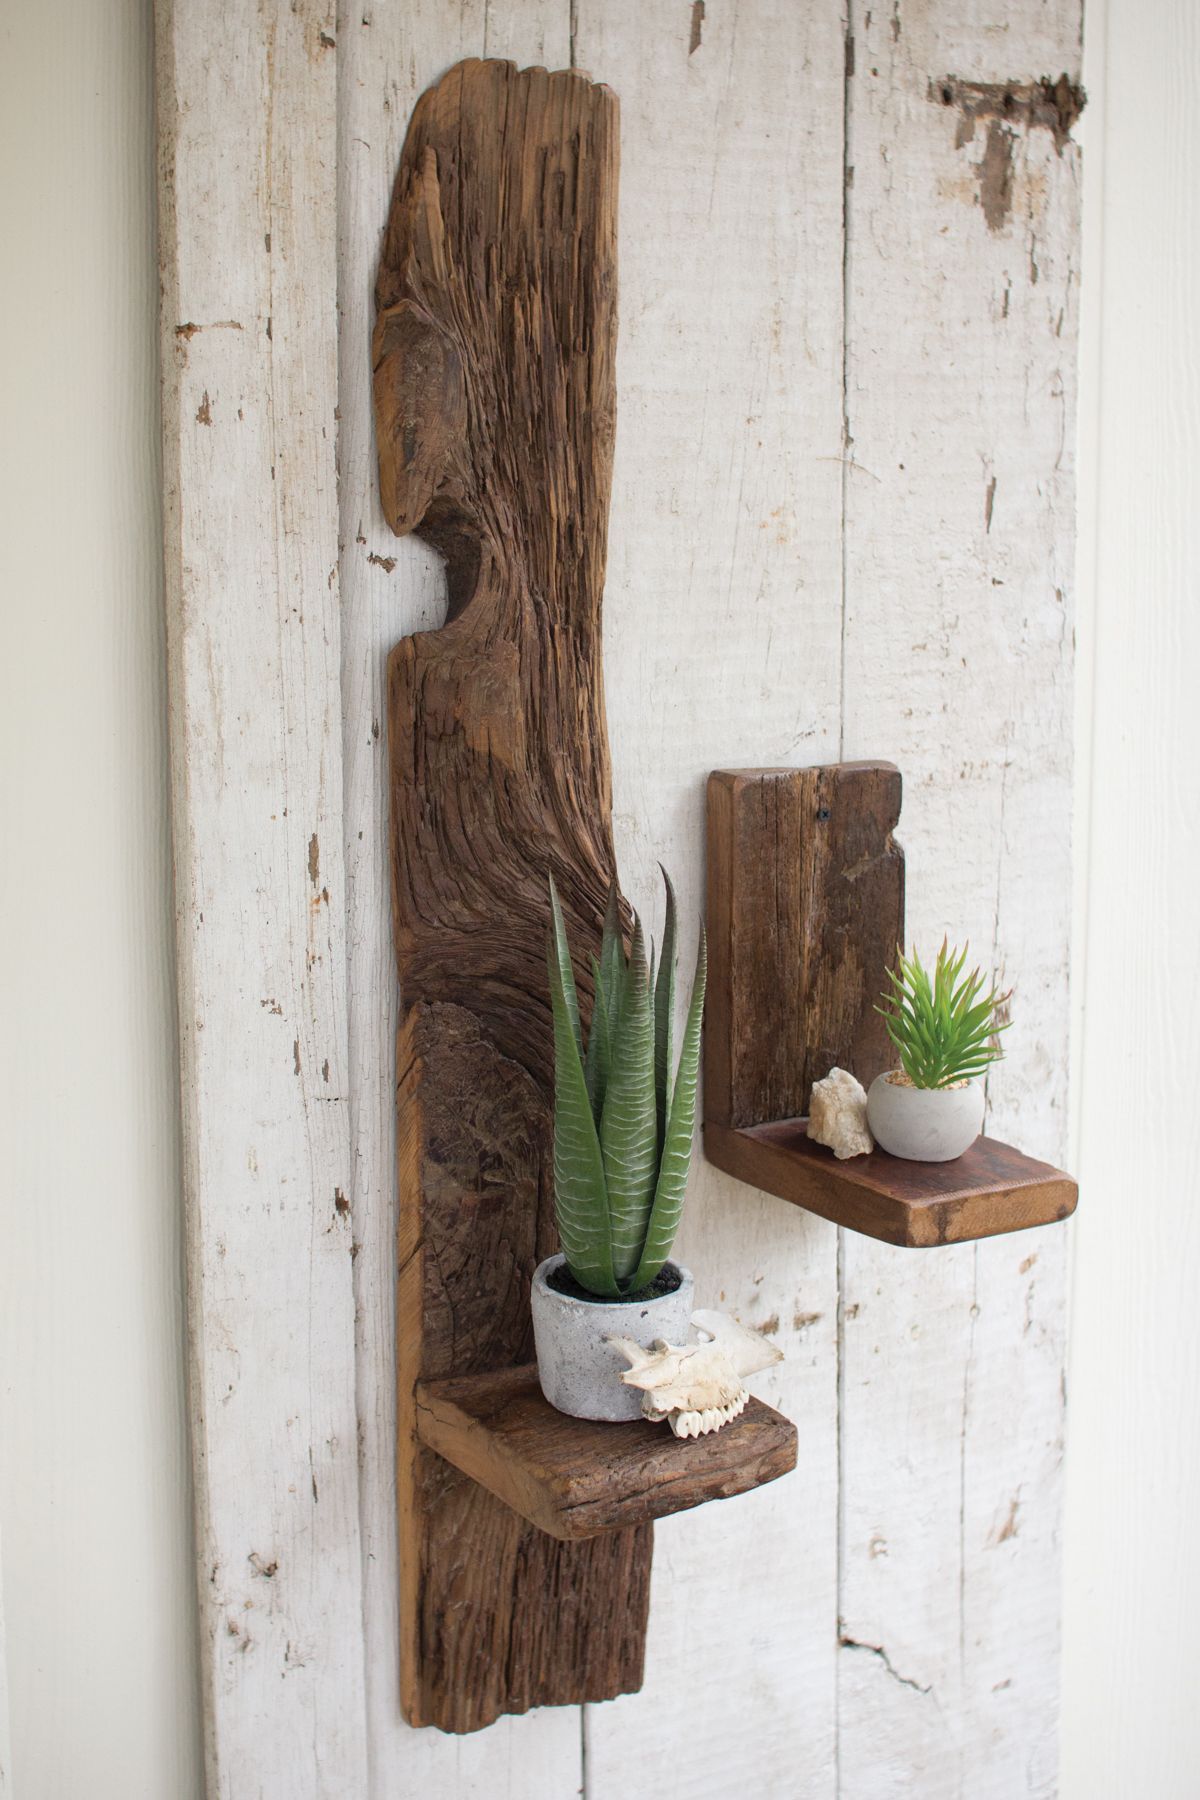 GwG Outlet Small Recycled Wood Wall Shelf NSE1022 - Walmart.com - GwG Outlet Small Recycled Wood Wall Shelf NSE1022 - Walmart.com -   17 diy Wood rustic ideas